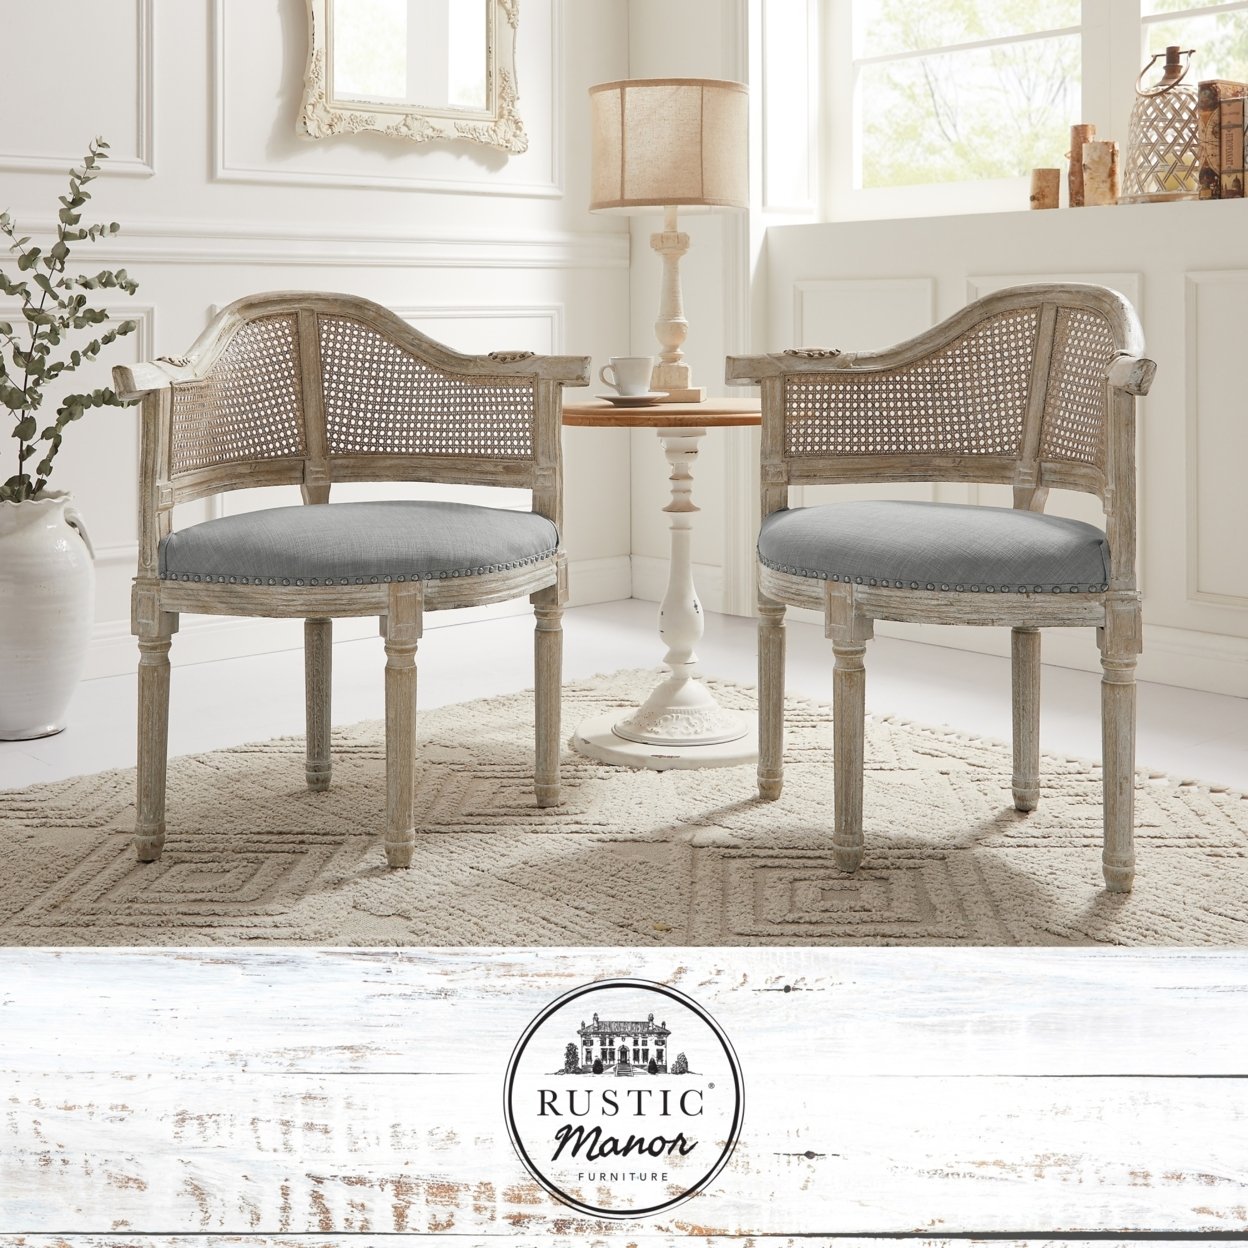 Arius Accent Chair - Upholstered, Nailhead Trim , Rattan Imitation, Curved Back , Antique Brushed Wood Finish - Beige